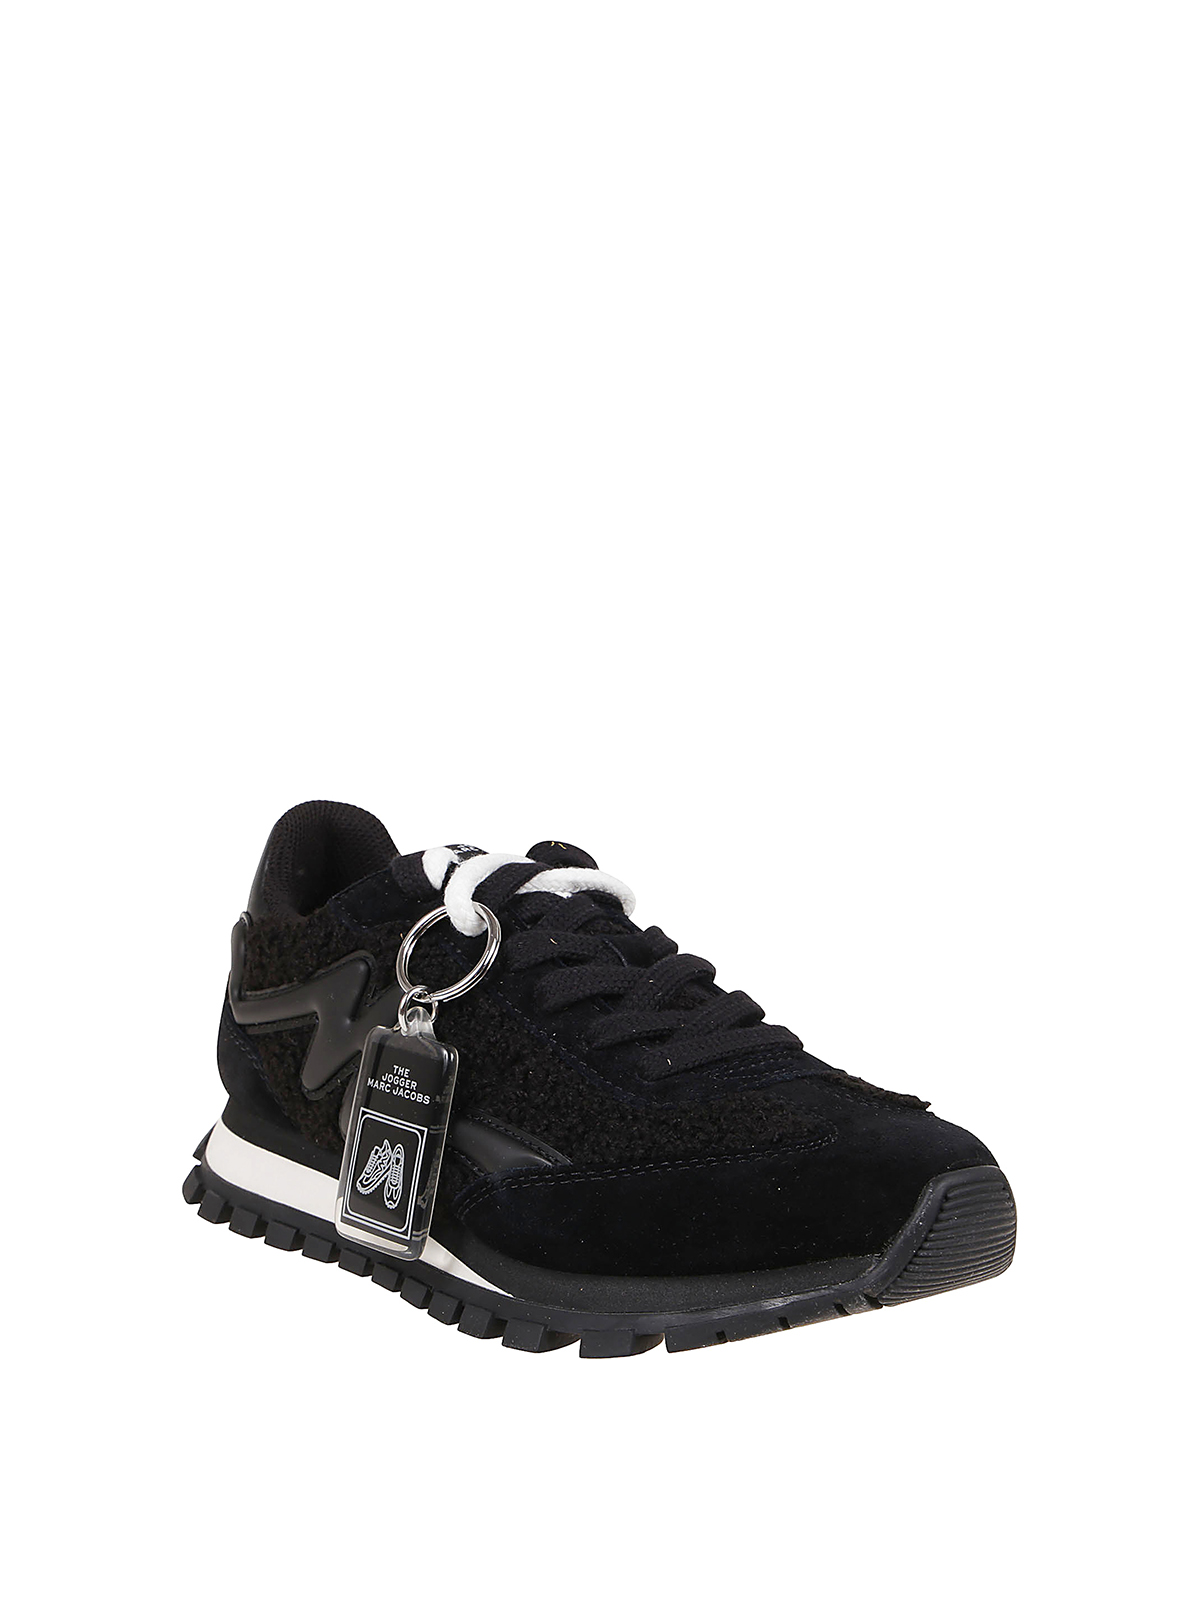 Trainers Marc Jacobs - The Teddy Jogger sneakers - M9002354001 | iKRIX.com